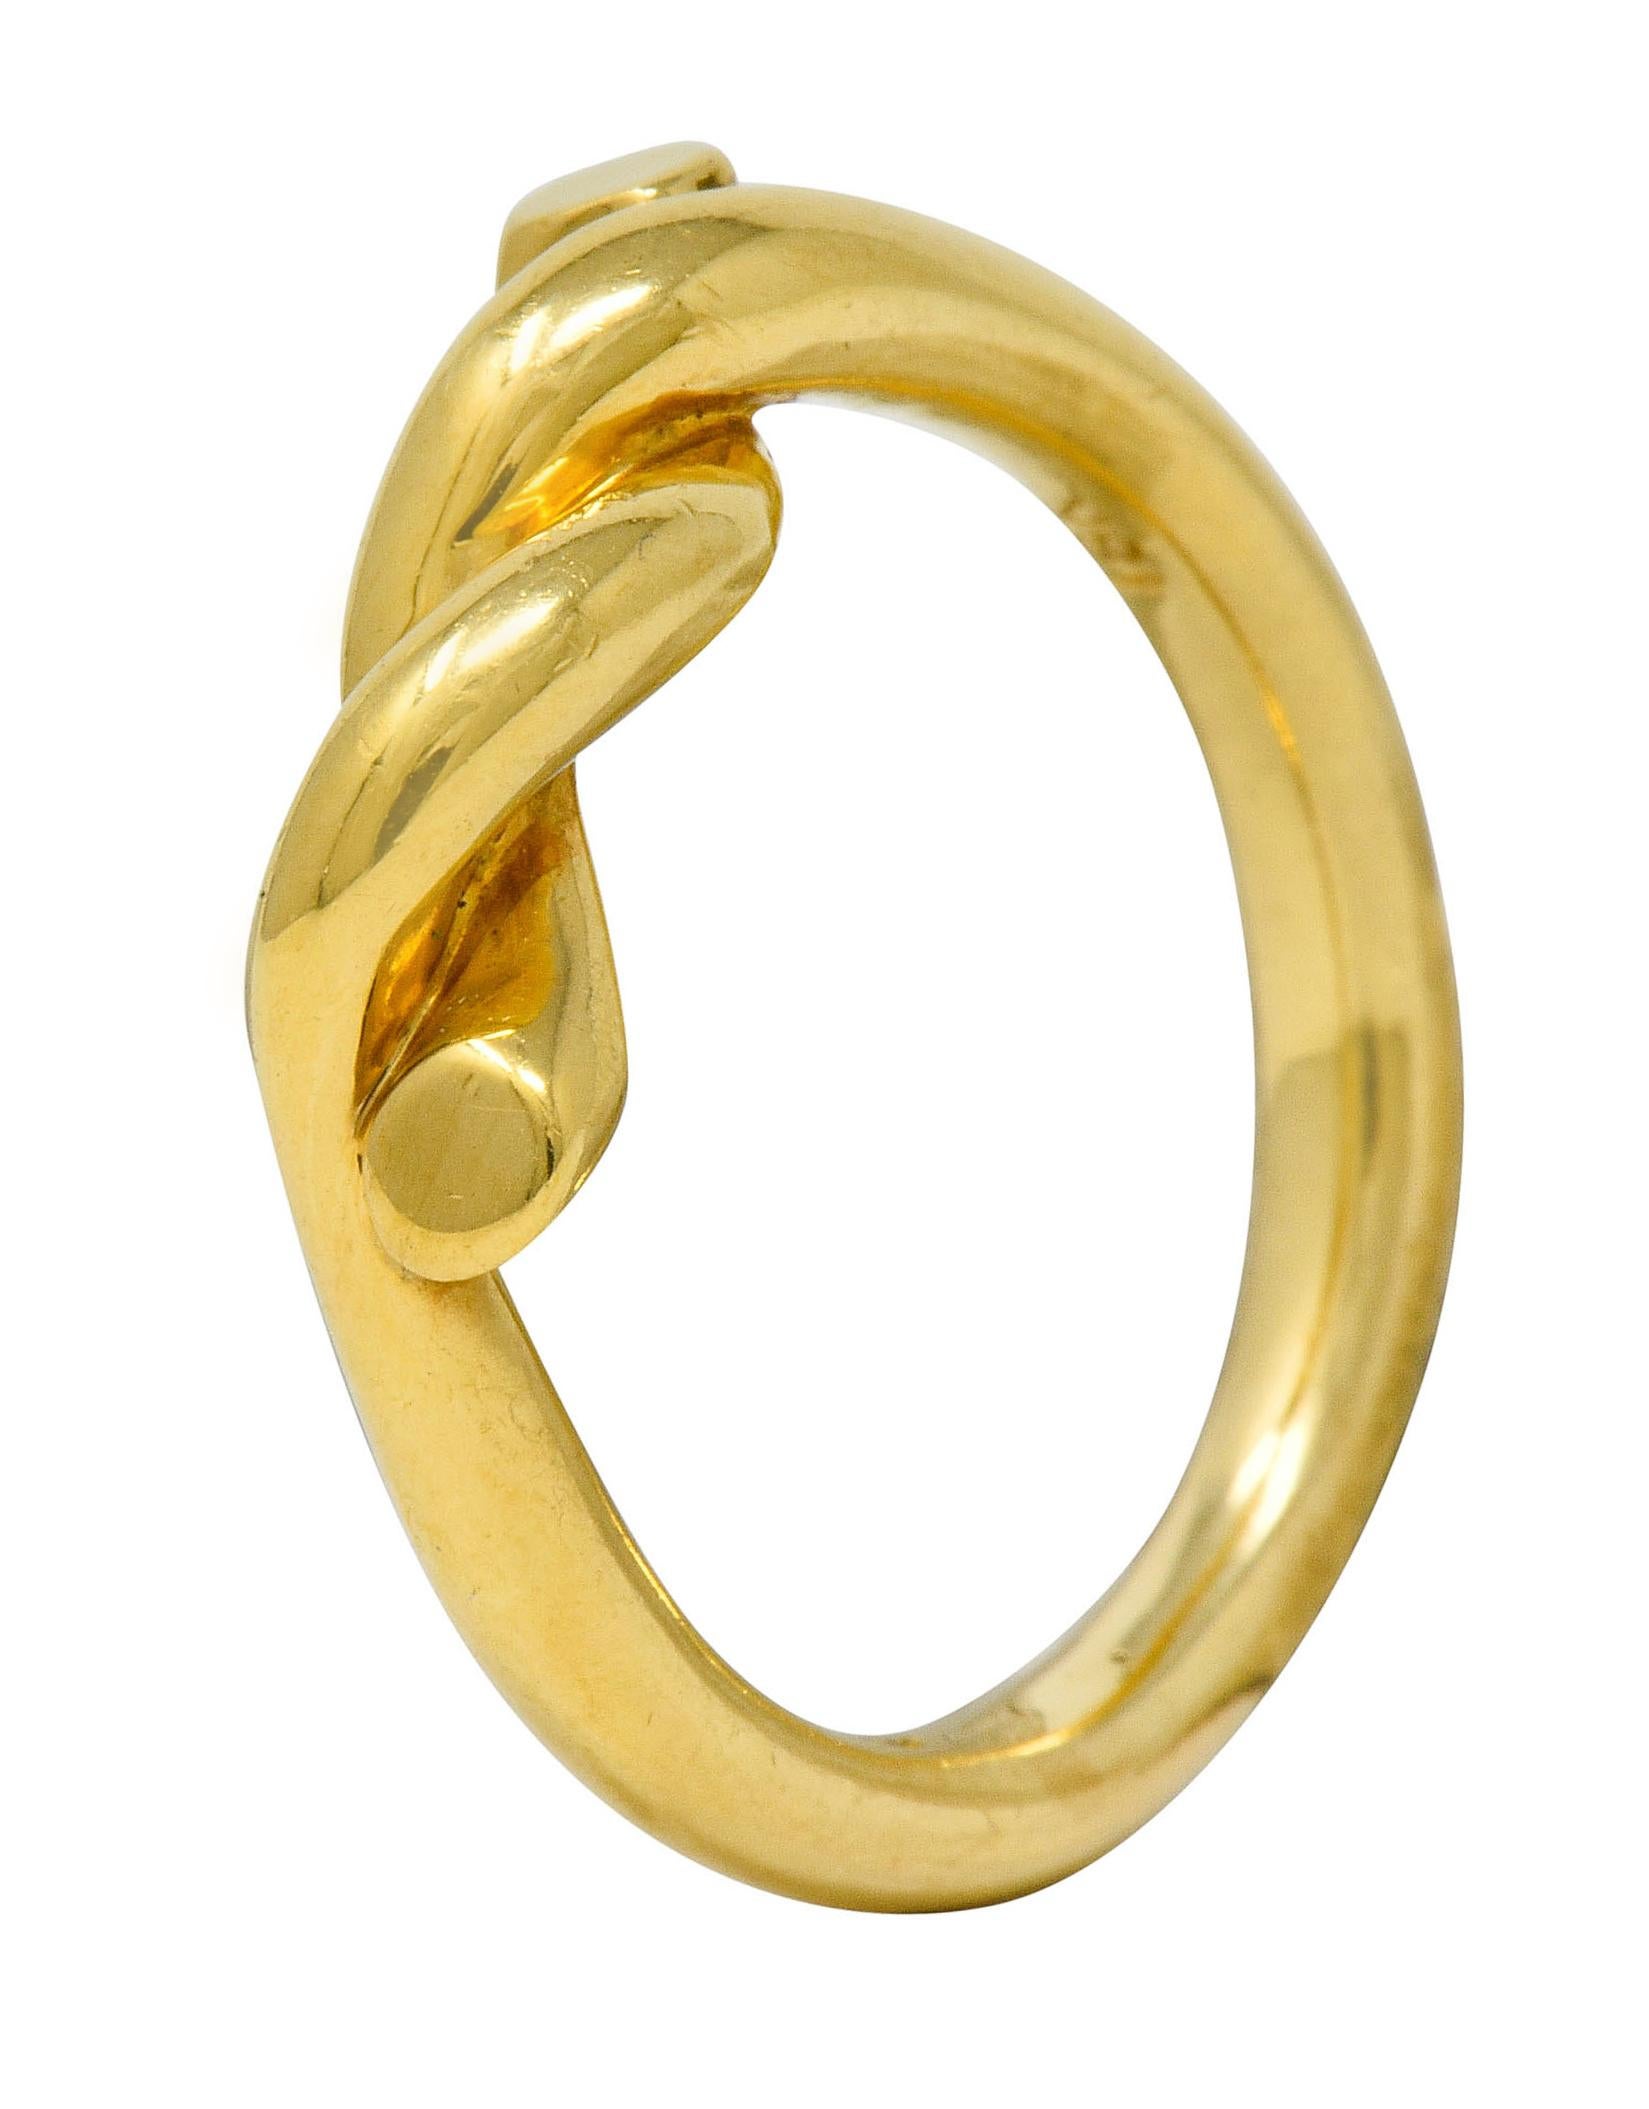 Tiffany & Co. 1980s Vintage 18 Karat Gold Twisted Knot Band Ring 2